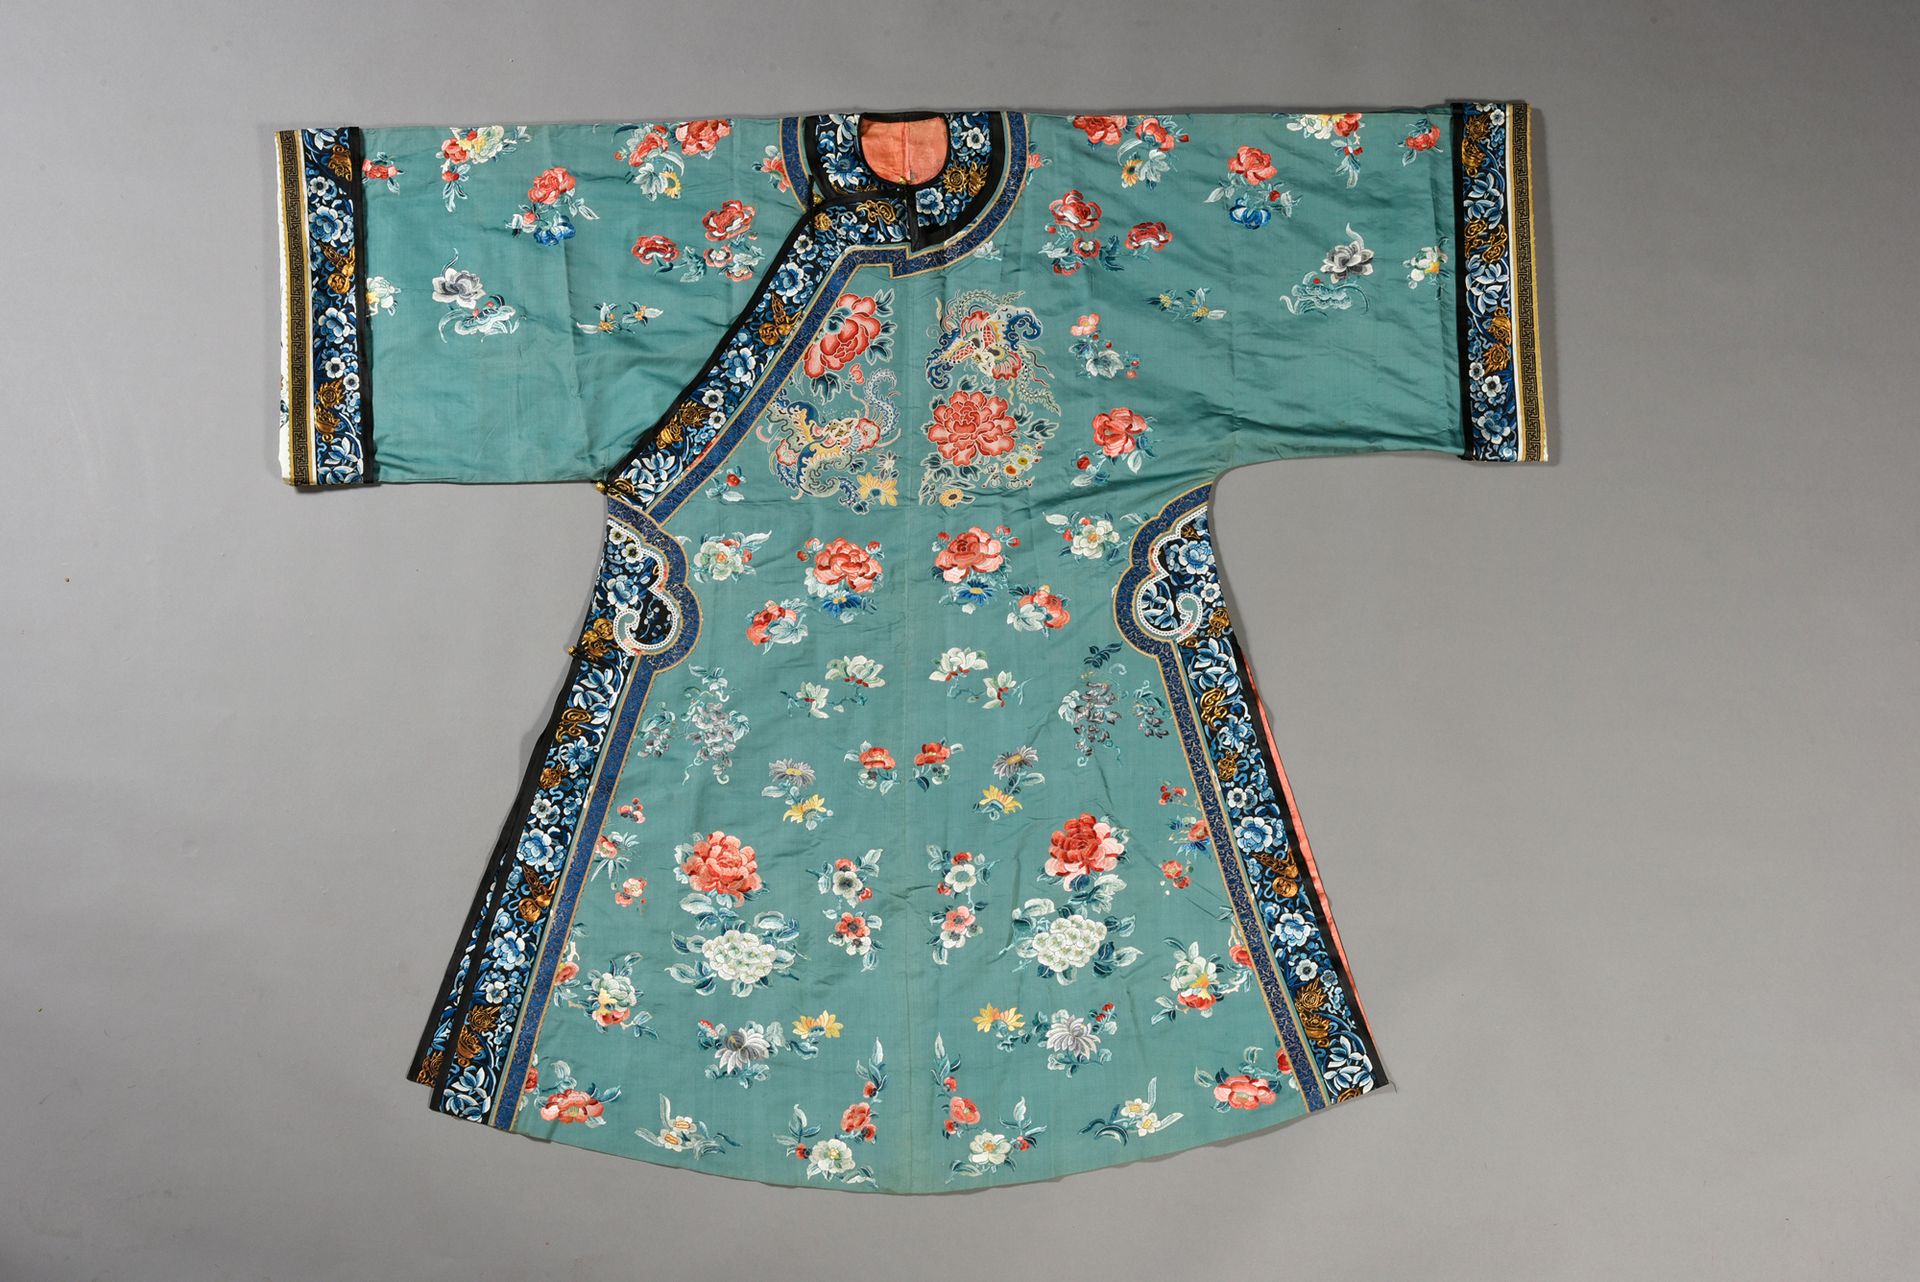 Null Women's dress, China, late 19th century, celadon silk twill embroidered wit&hellip;